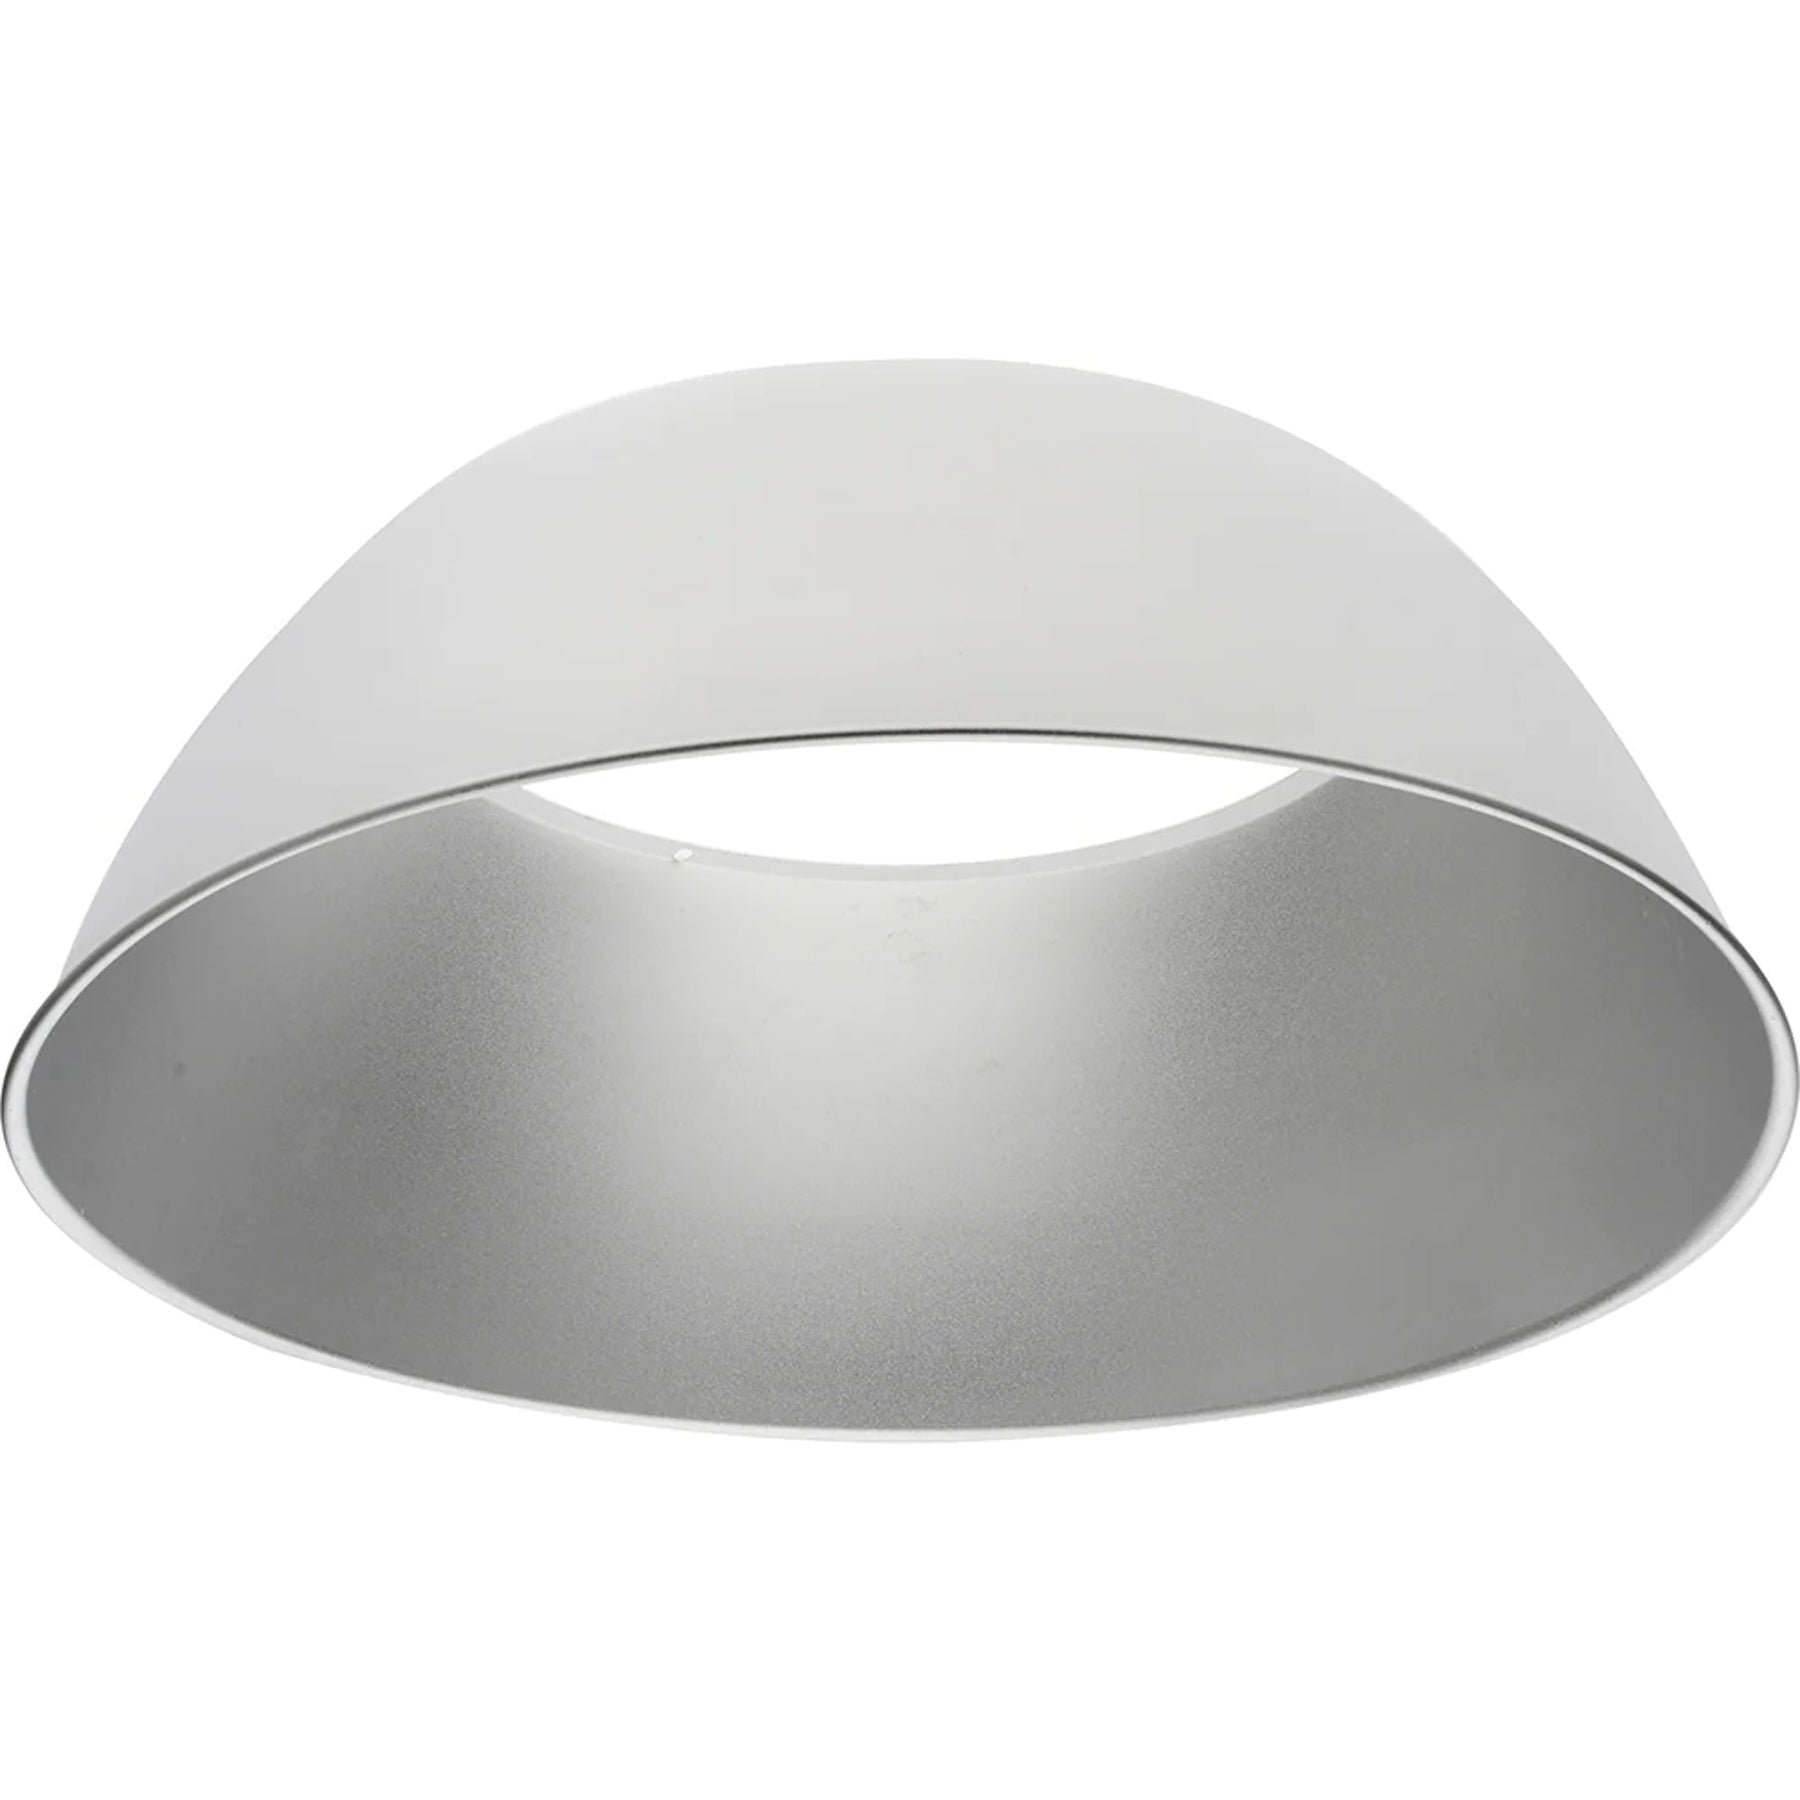  View details for CCT Tunable UFO High Bay Accessory: Small Aluminum Reflector CCT Tunable UFO High Bay Accessory: Small Aluminum Reflector